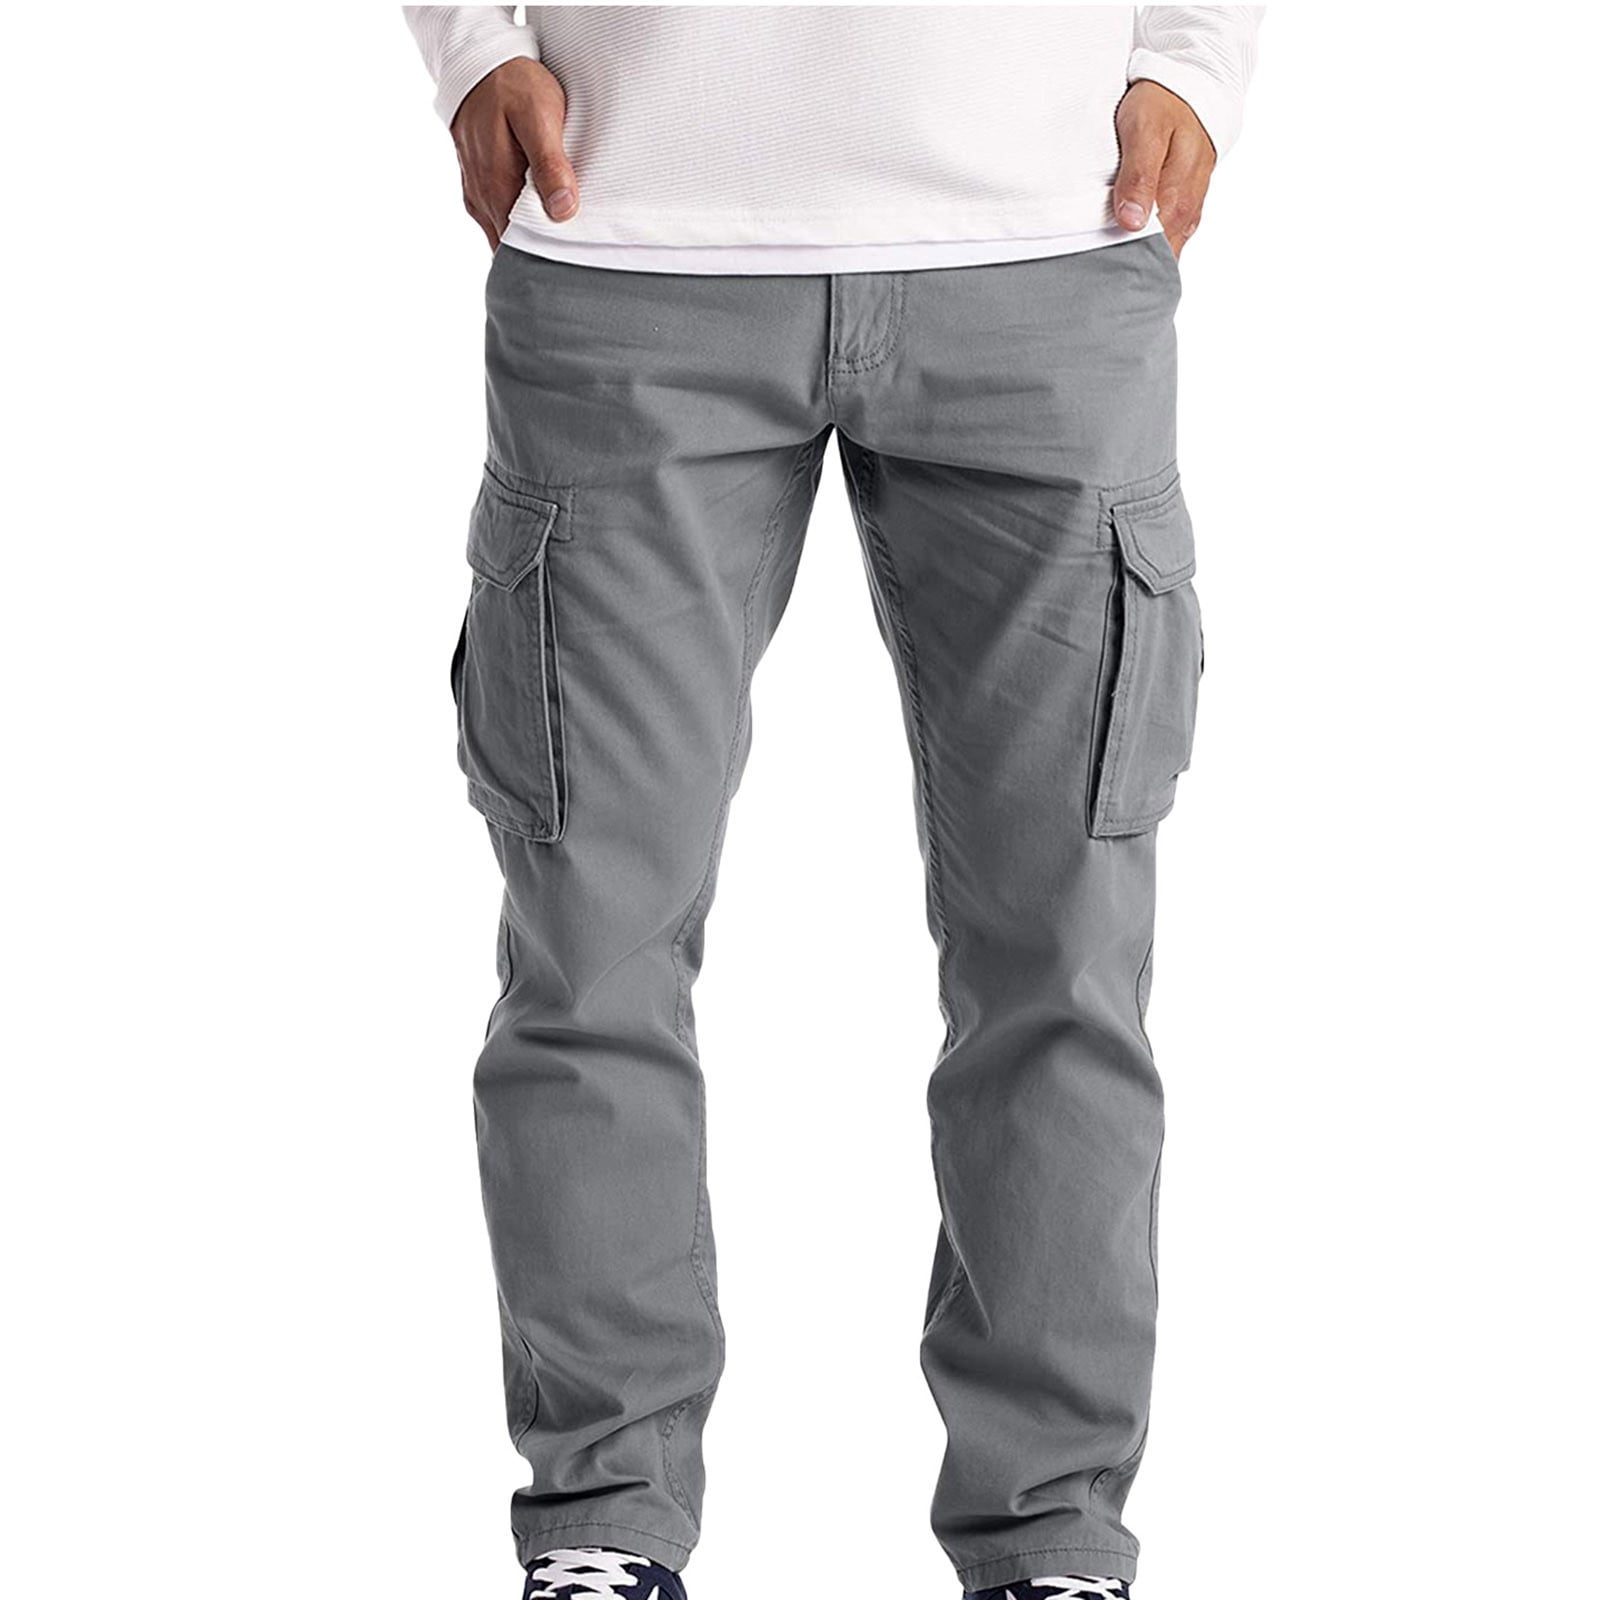 Cargo Pants Outfits  Cargo pants outfit men, Cargo pants style